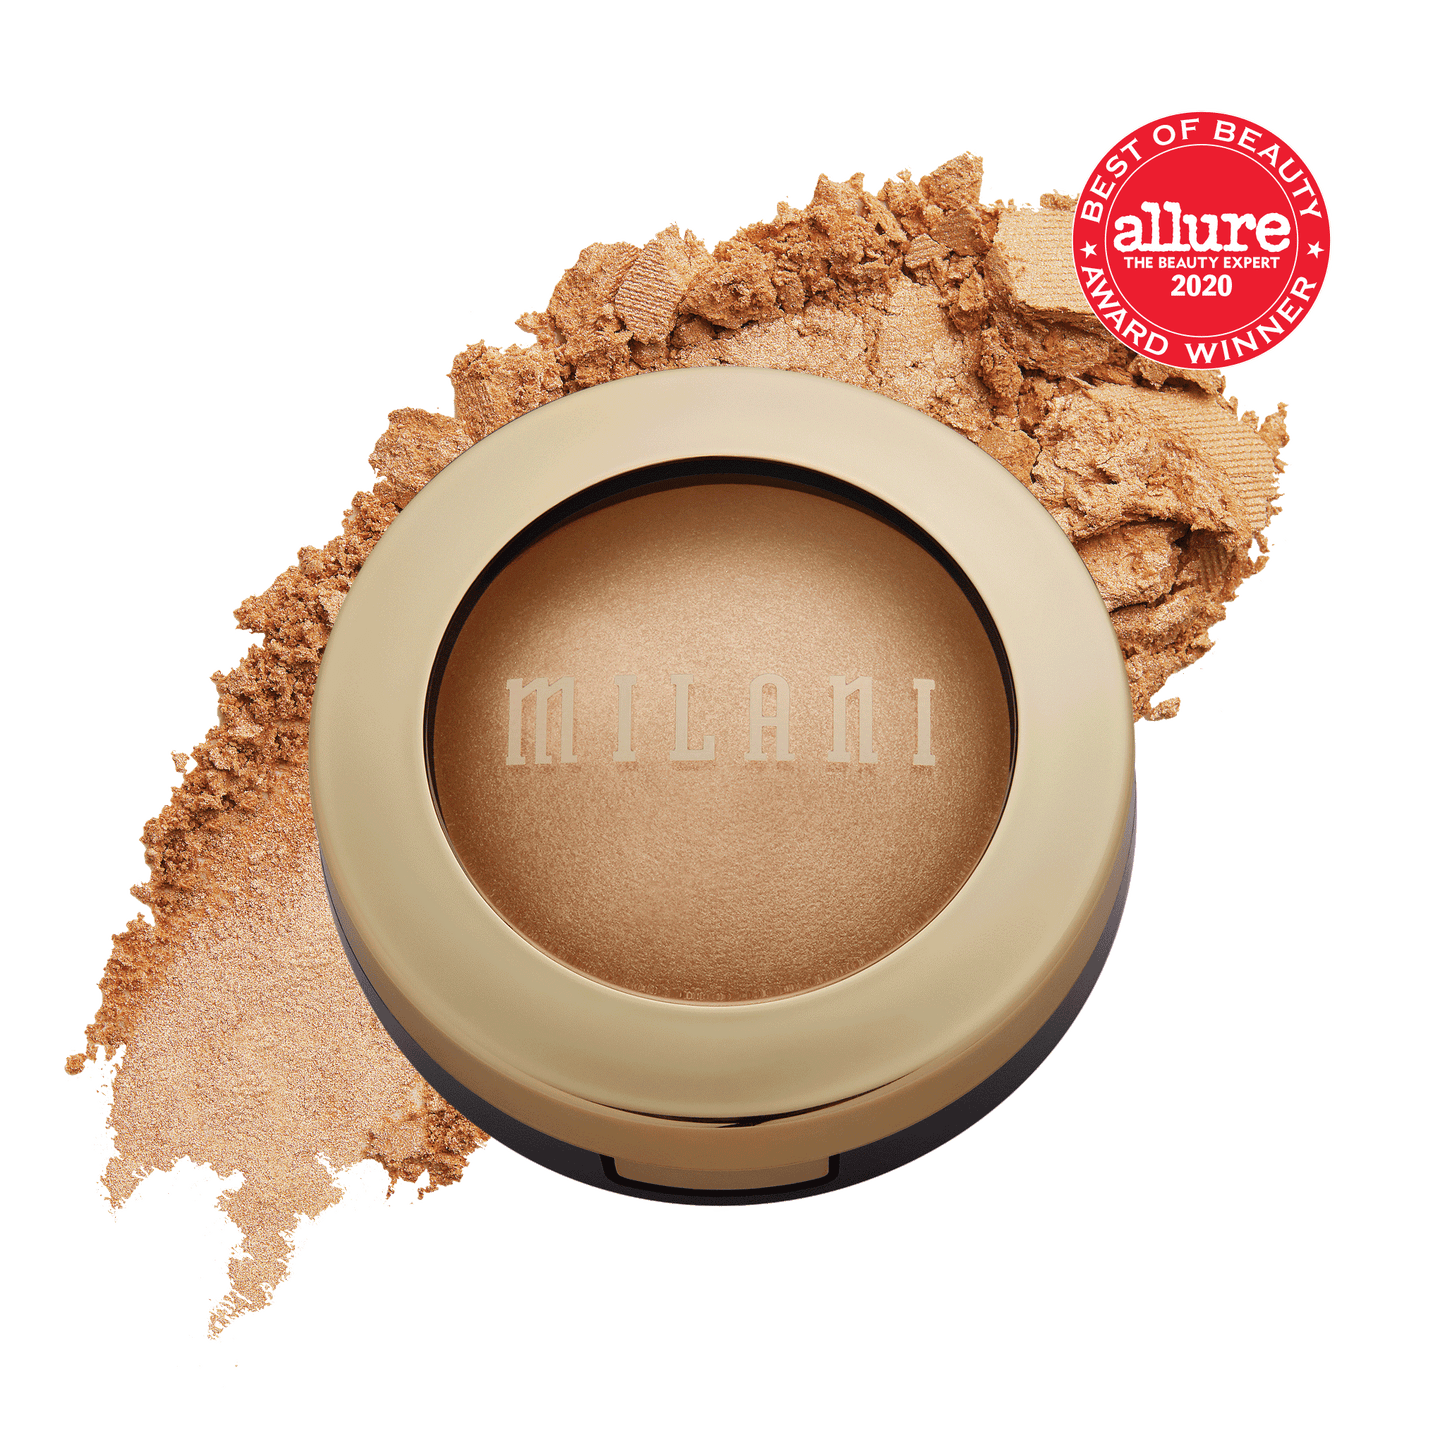 Milani Baked Haighlighter - Champagne D'oro